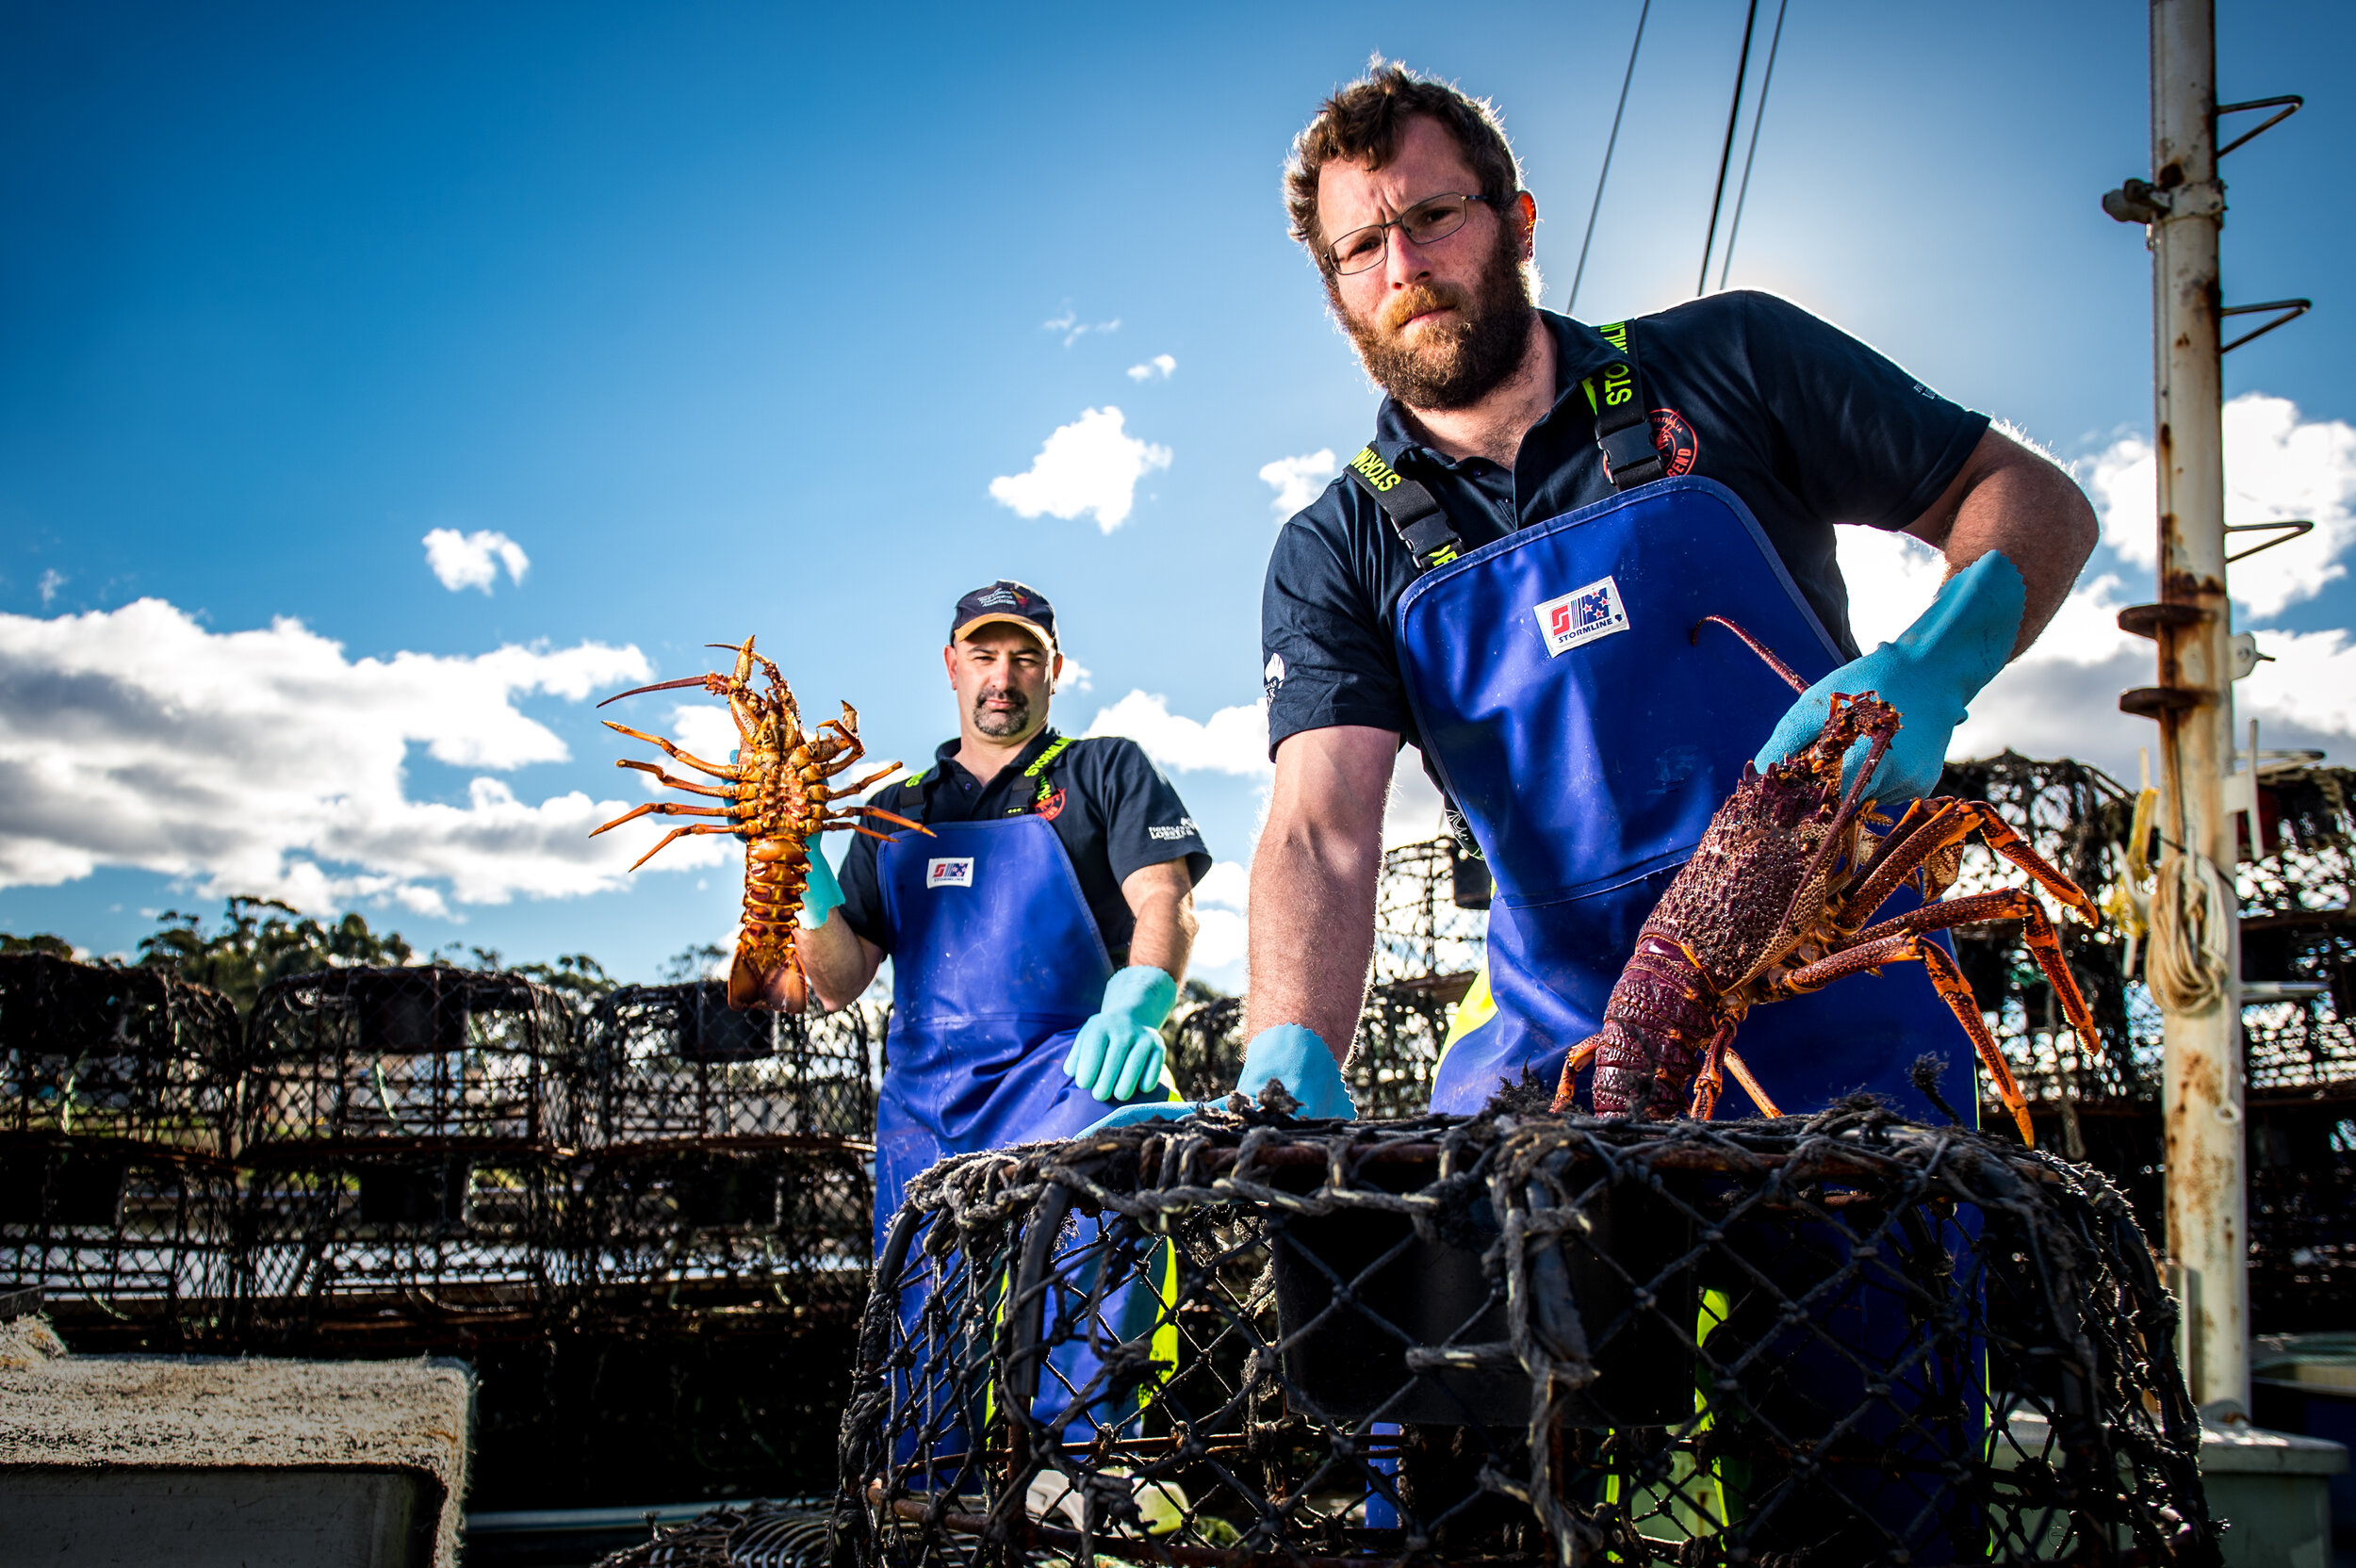 _BOLD CONTENDER_SQUIZZY _ TABOR_HOLDING LOBSTER ON BOAT_20190721_6073.jpg